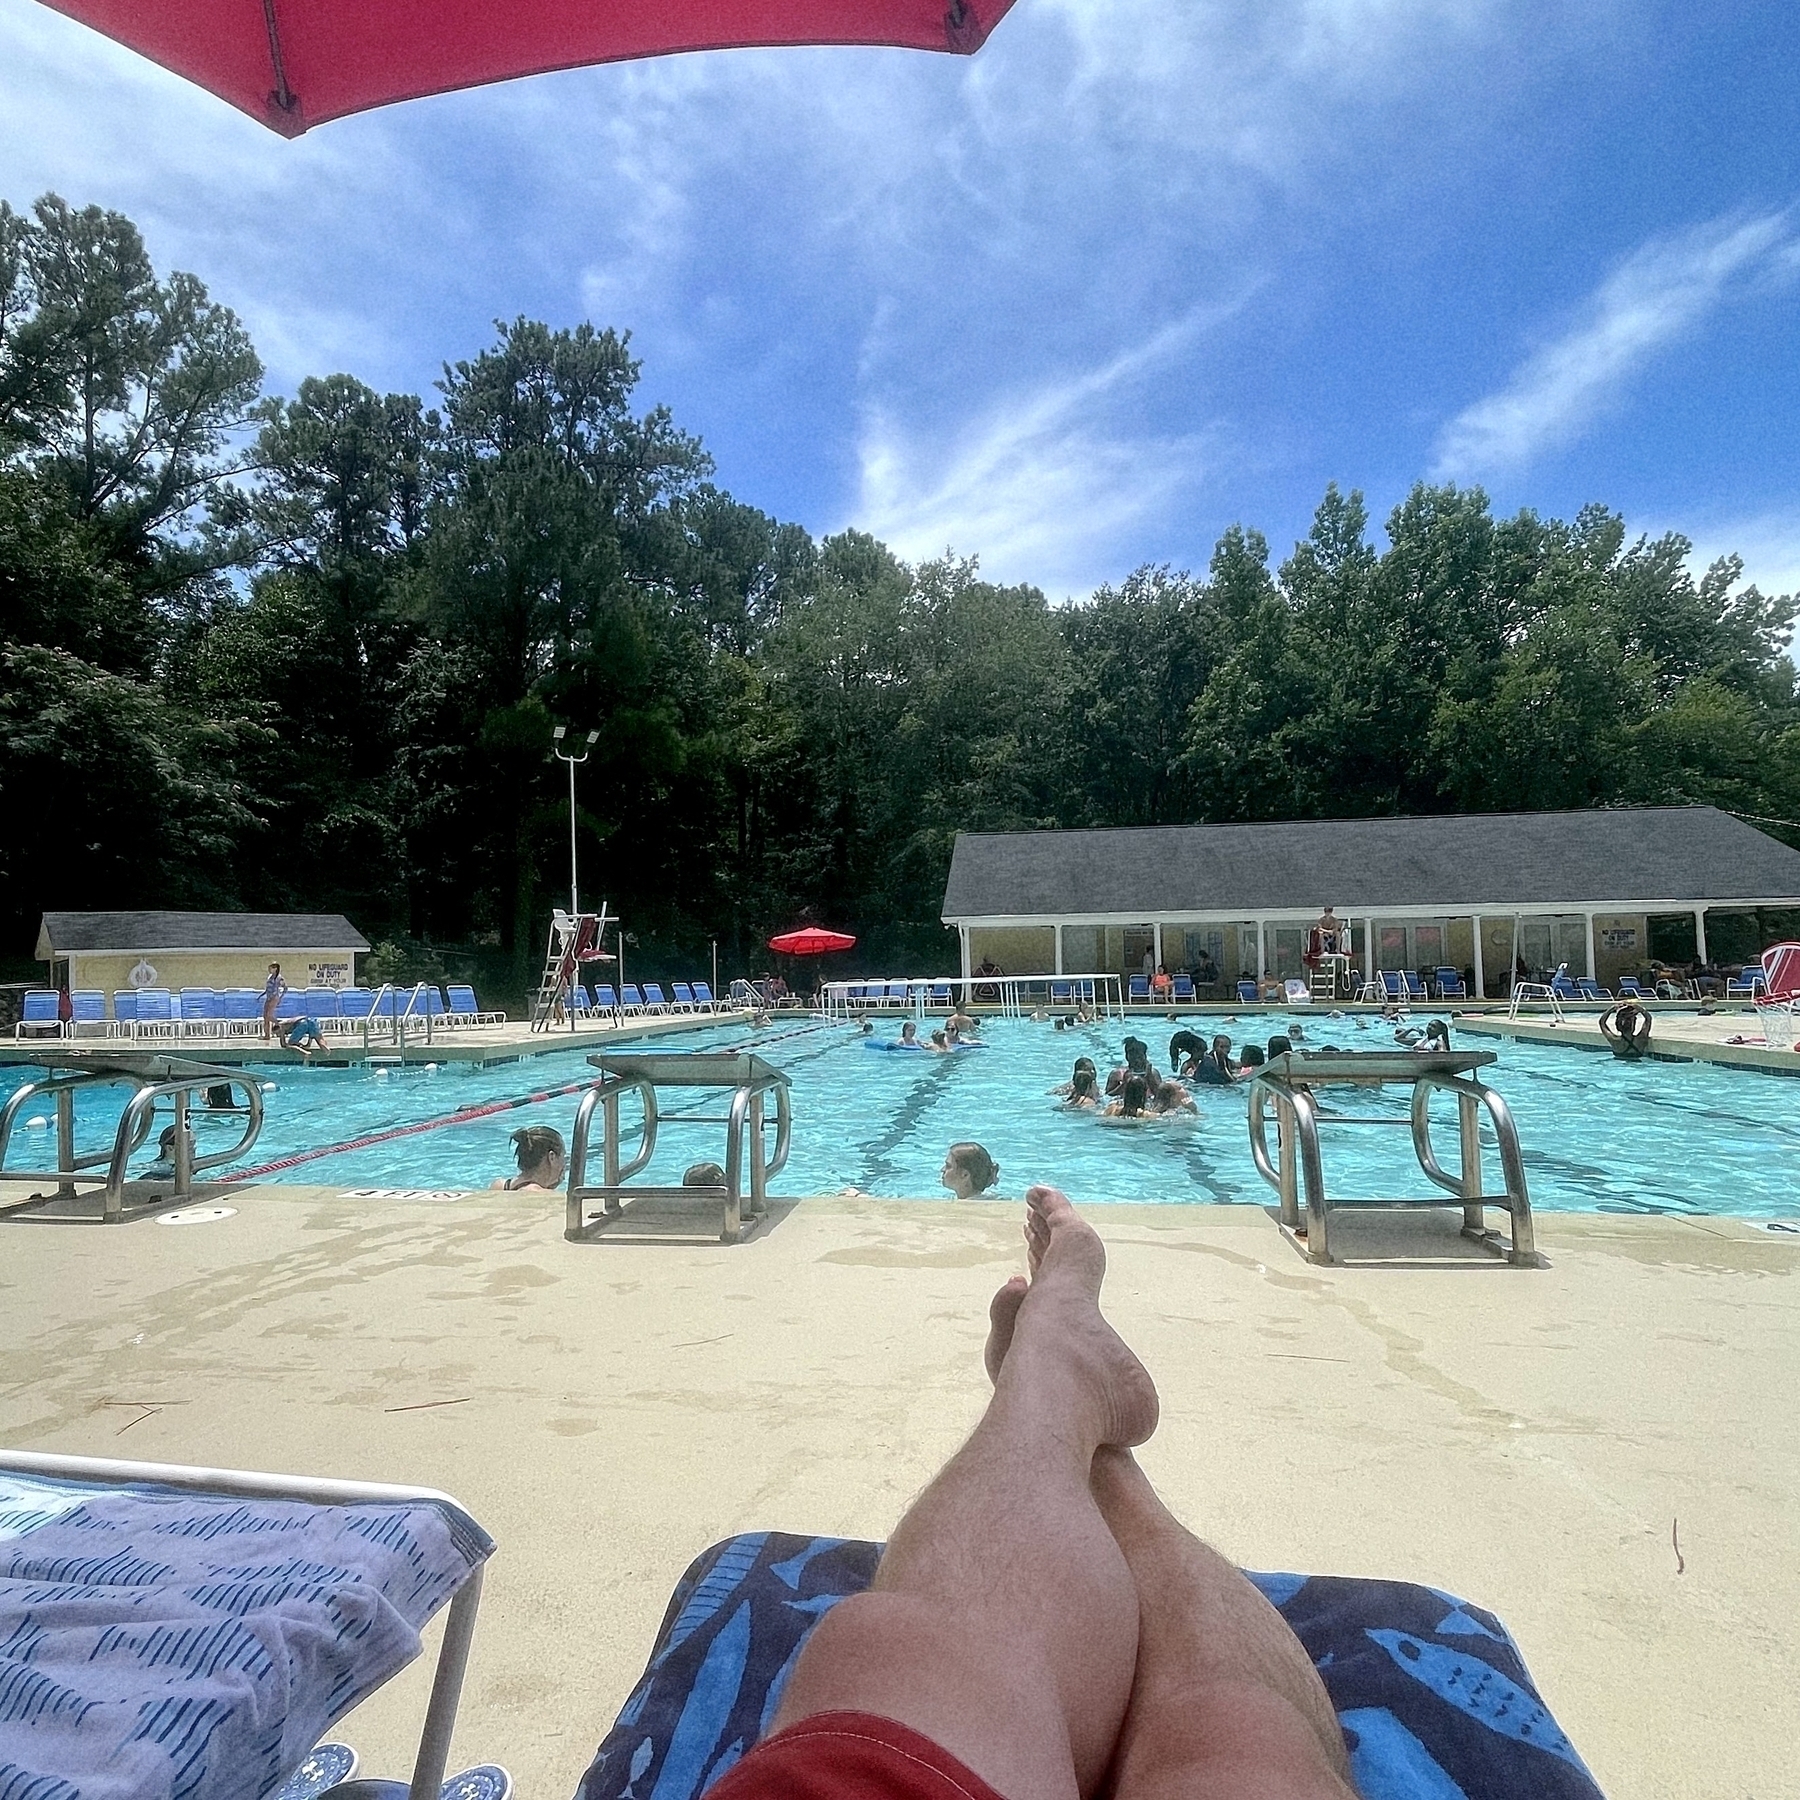 Relaxing at the pool. Feet propped up in the foreground. 